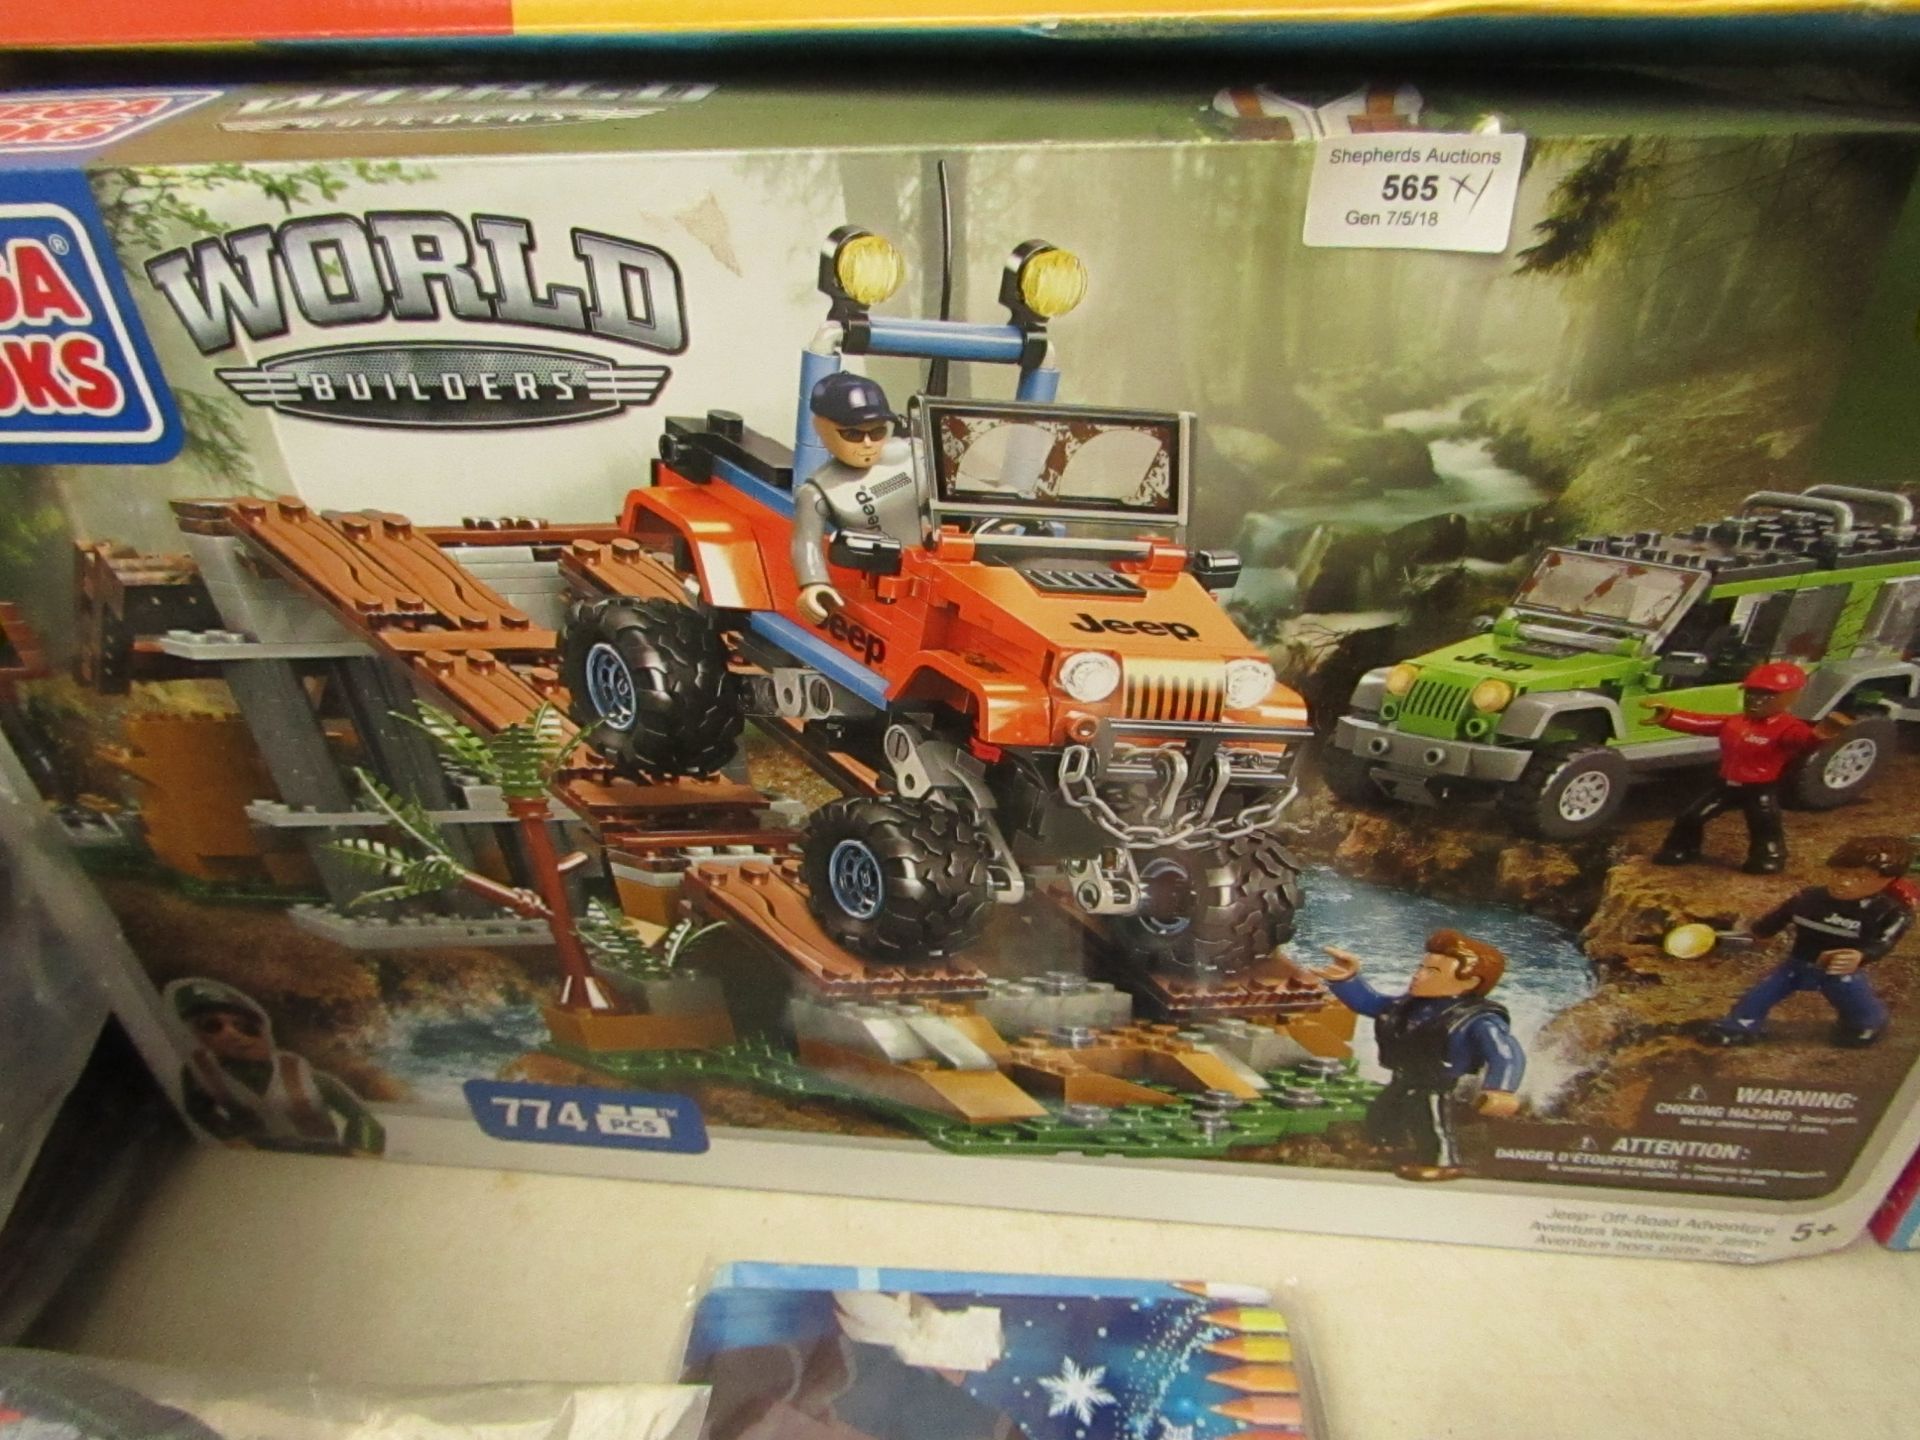 Mega Bloks Jeep world builders set, new and boxed.